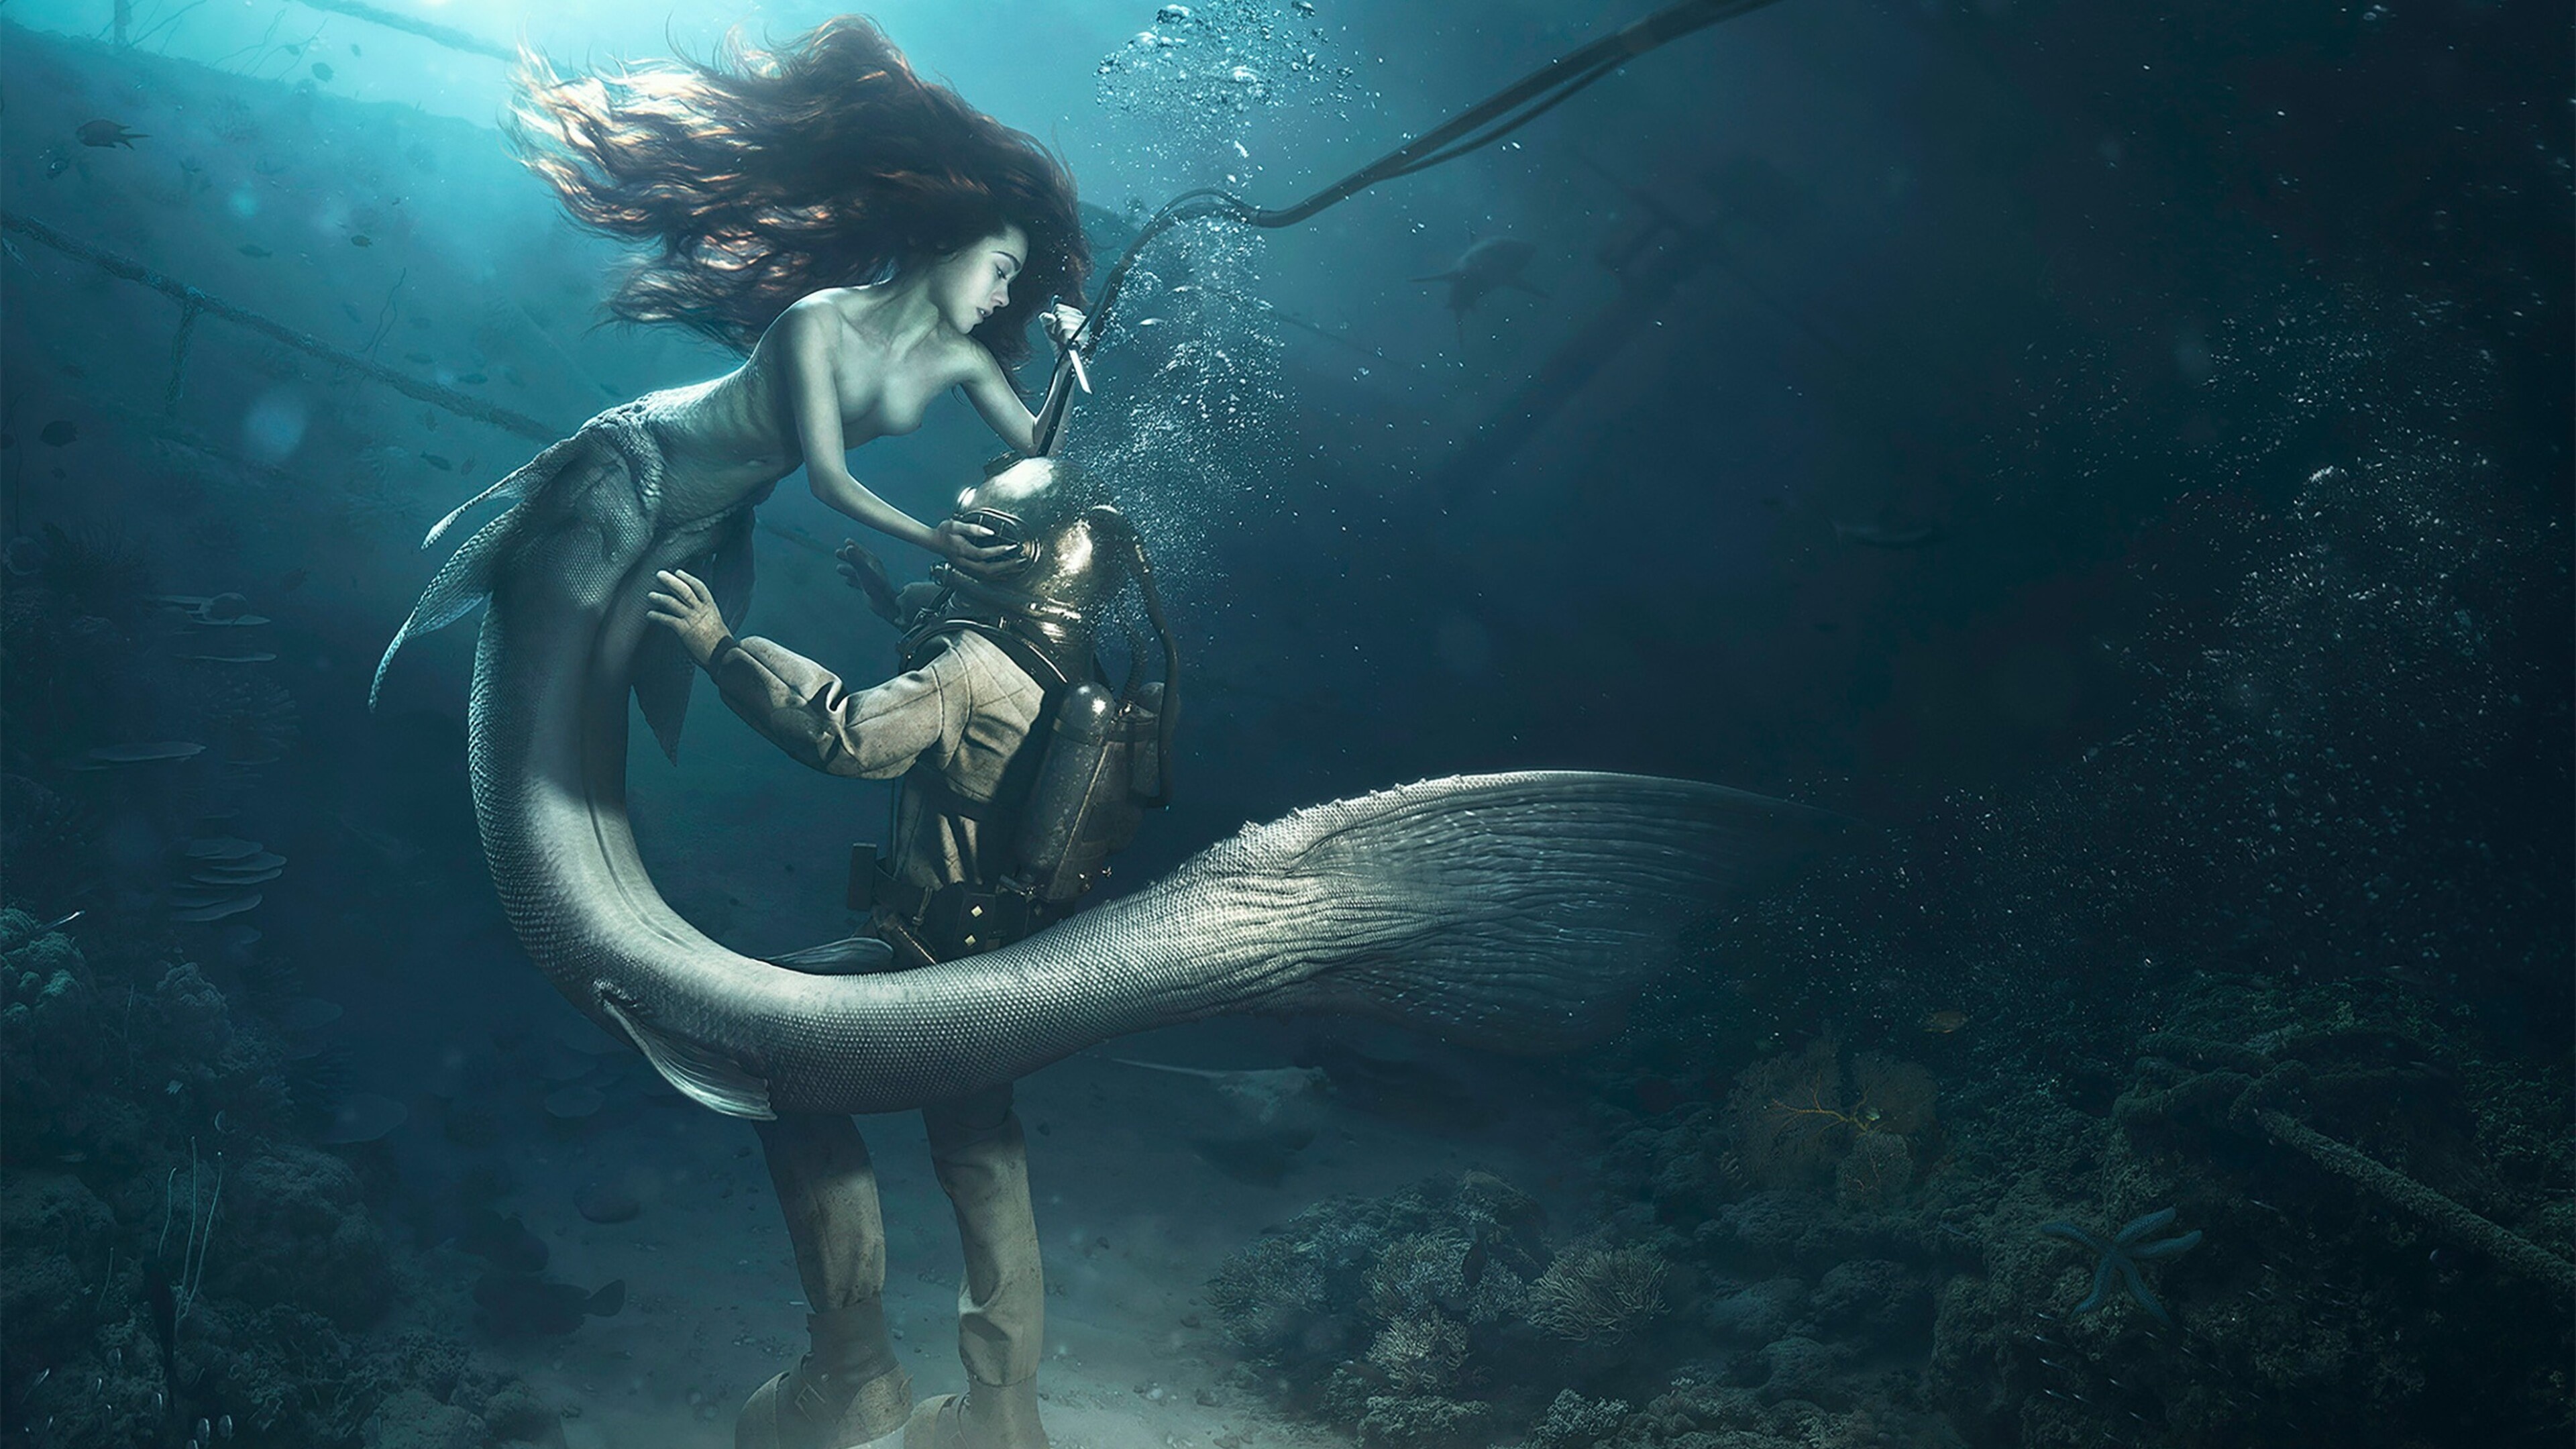 Diver and mermaid, 4K HD wallpapers, Breathtaking imagery, Captured moments, 3840x2160 4K Desktop